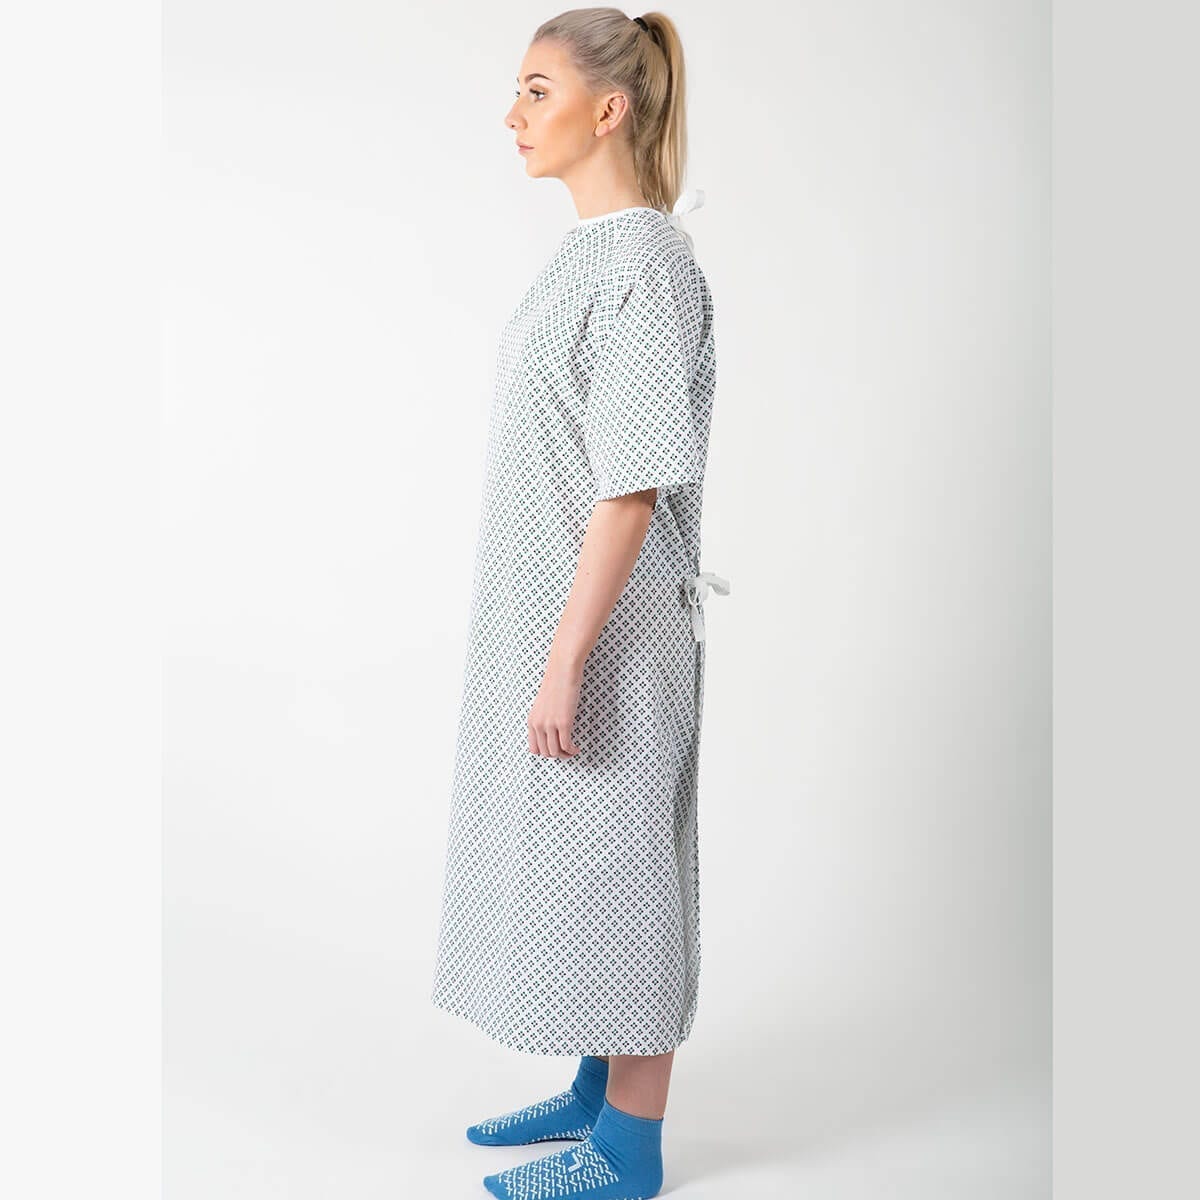 Hospital lapover gown - side view